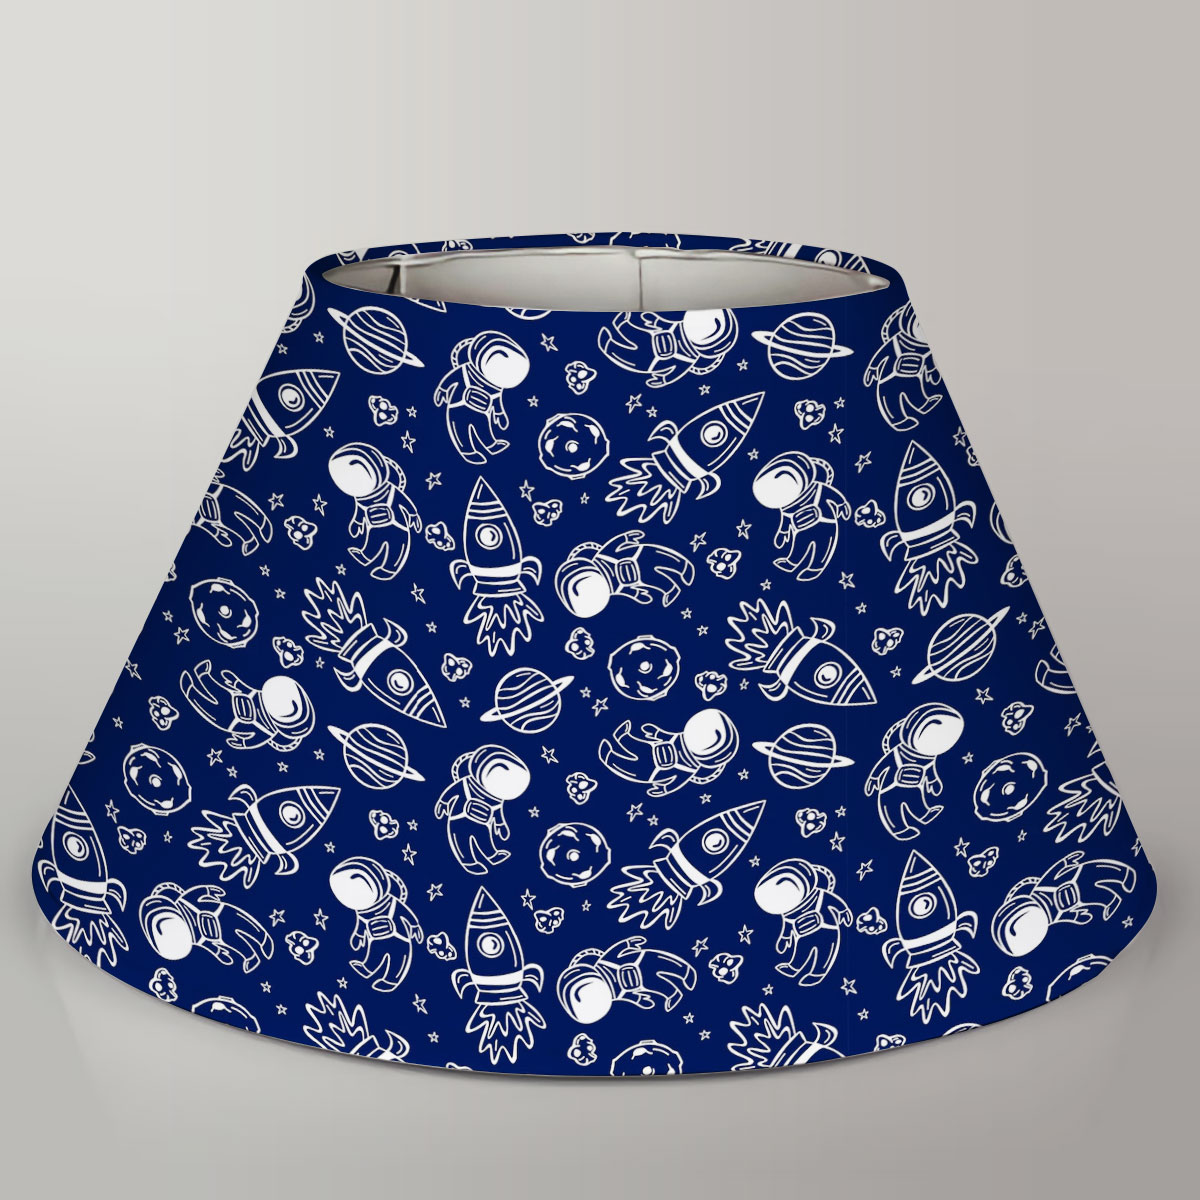 Astronaut in Doodle Style Lamp Cover